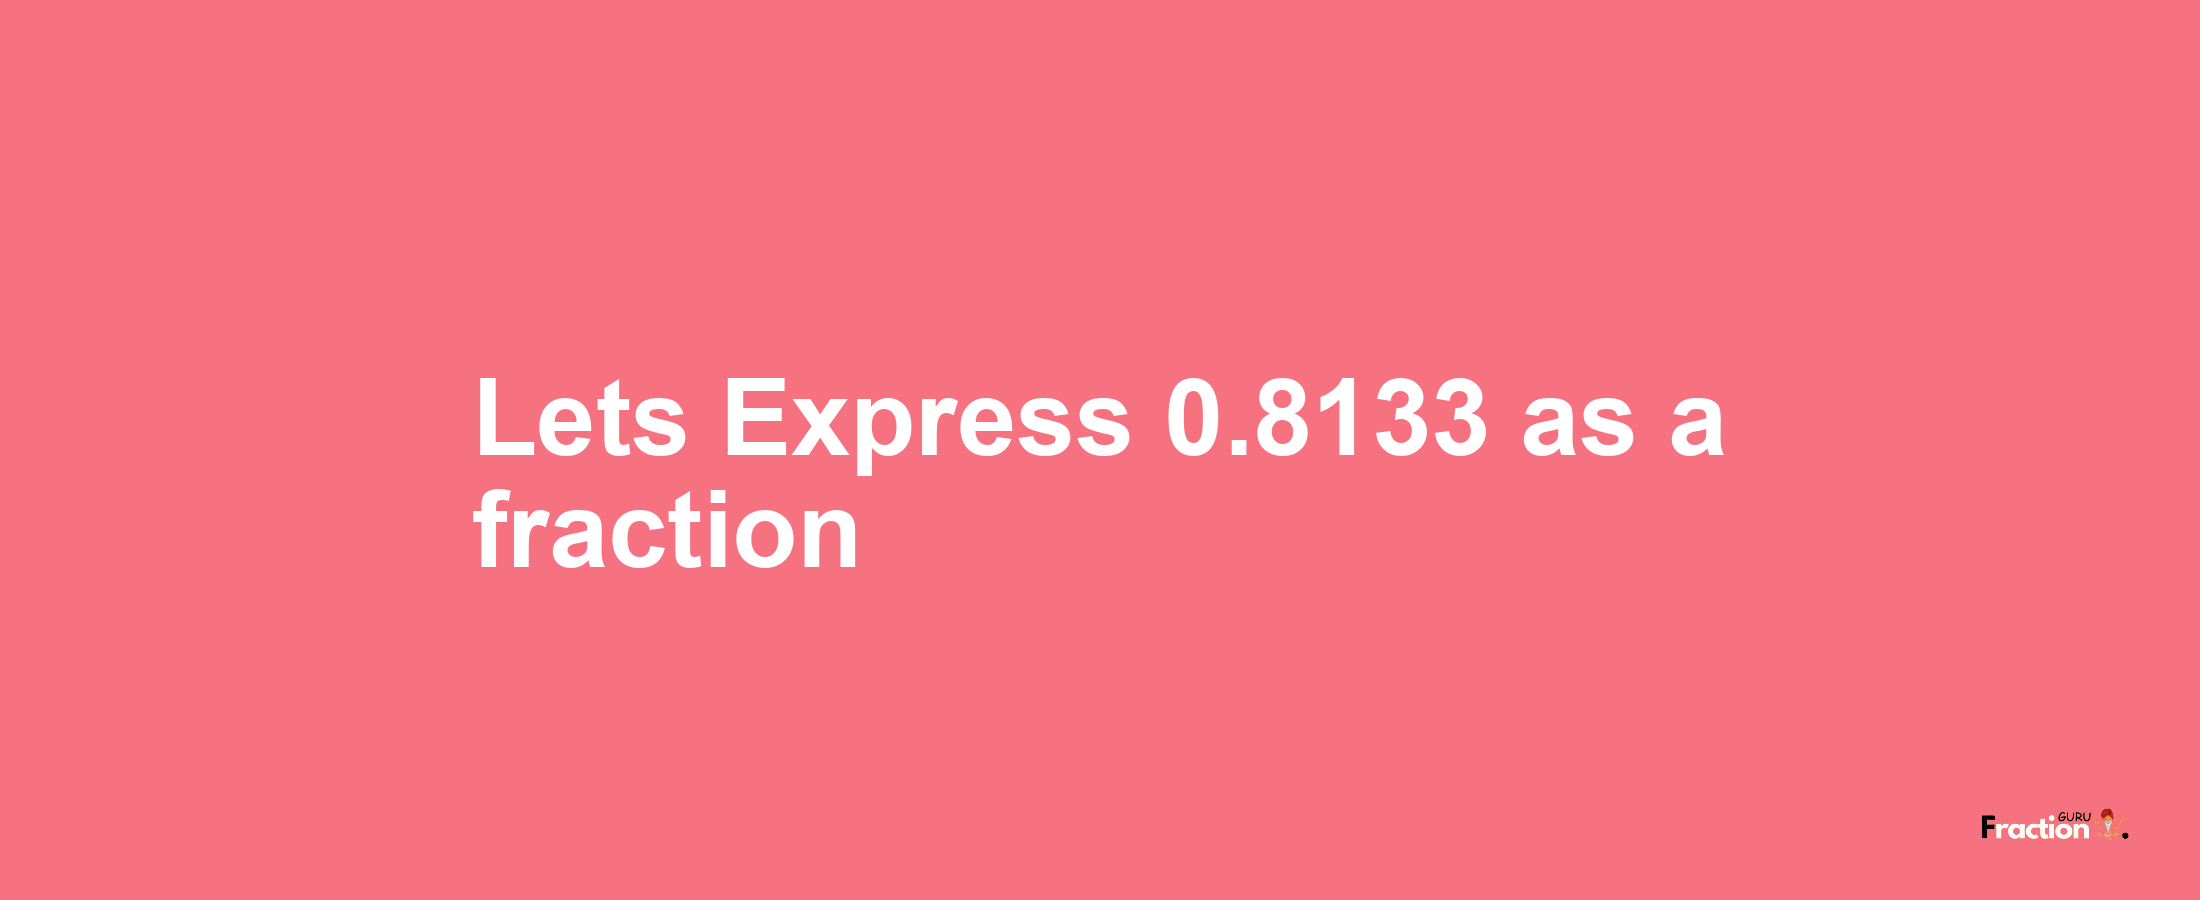 Lets Express 0.8133 as afraction